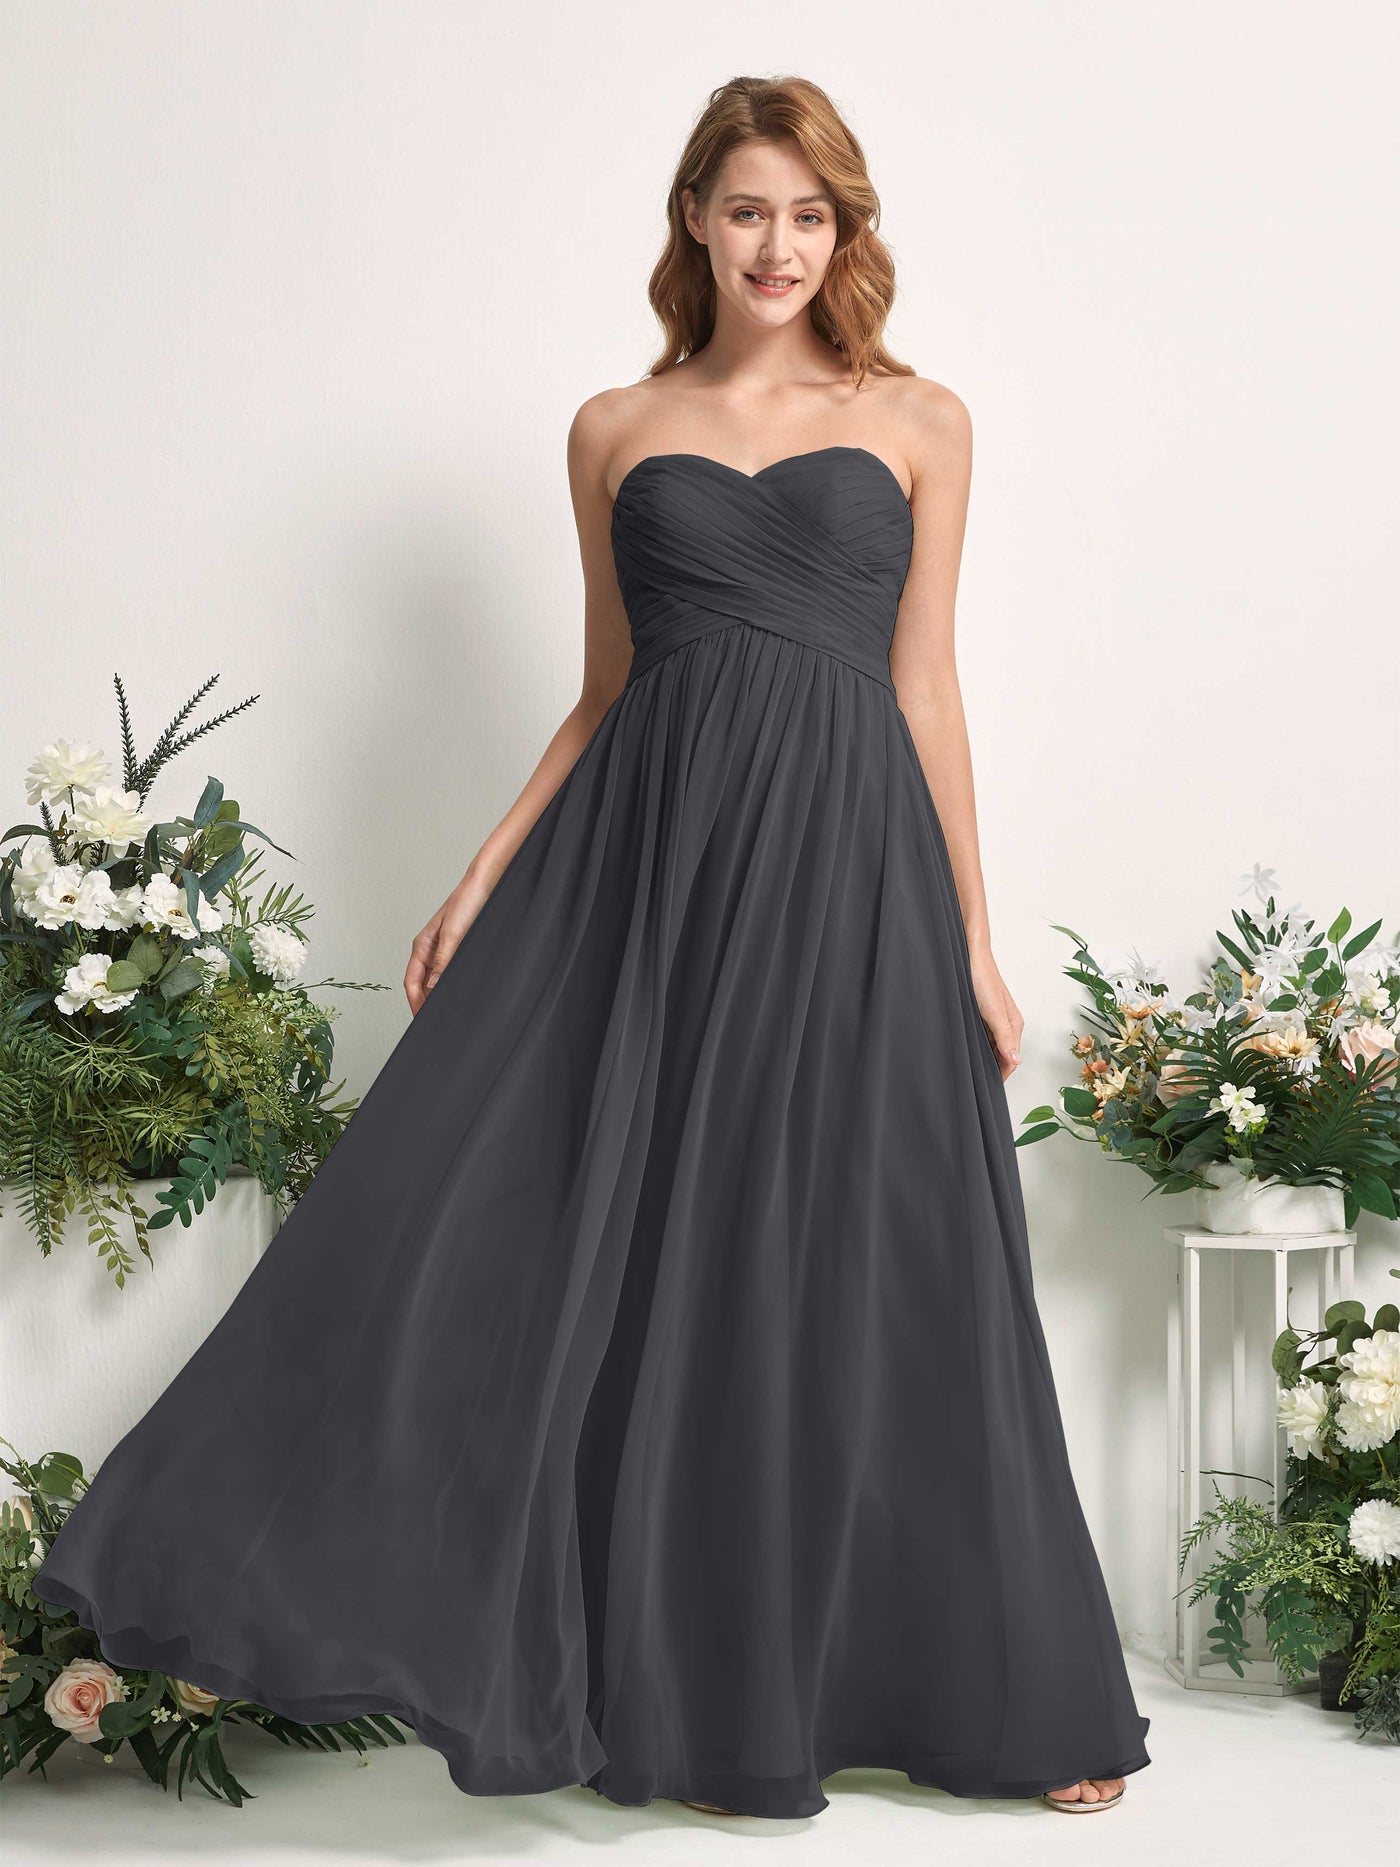 Bridesmaid Dress A-line Chiffon Sweetheart Full Length Sleeveless Wedding Party Dress - Pewter (81226938)#color_pewter